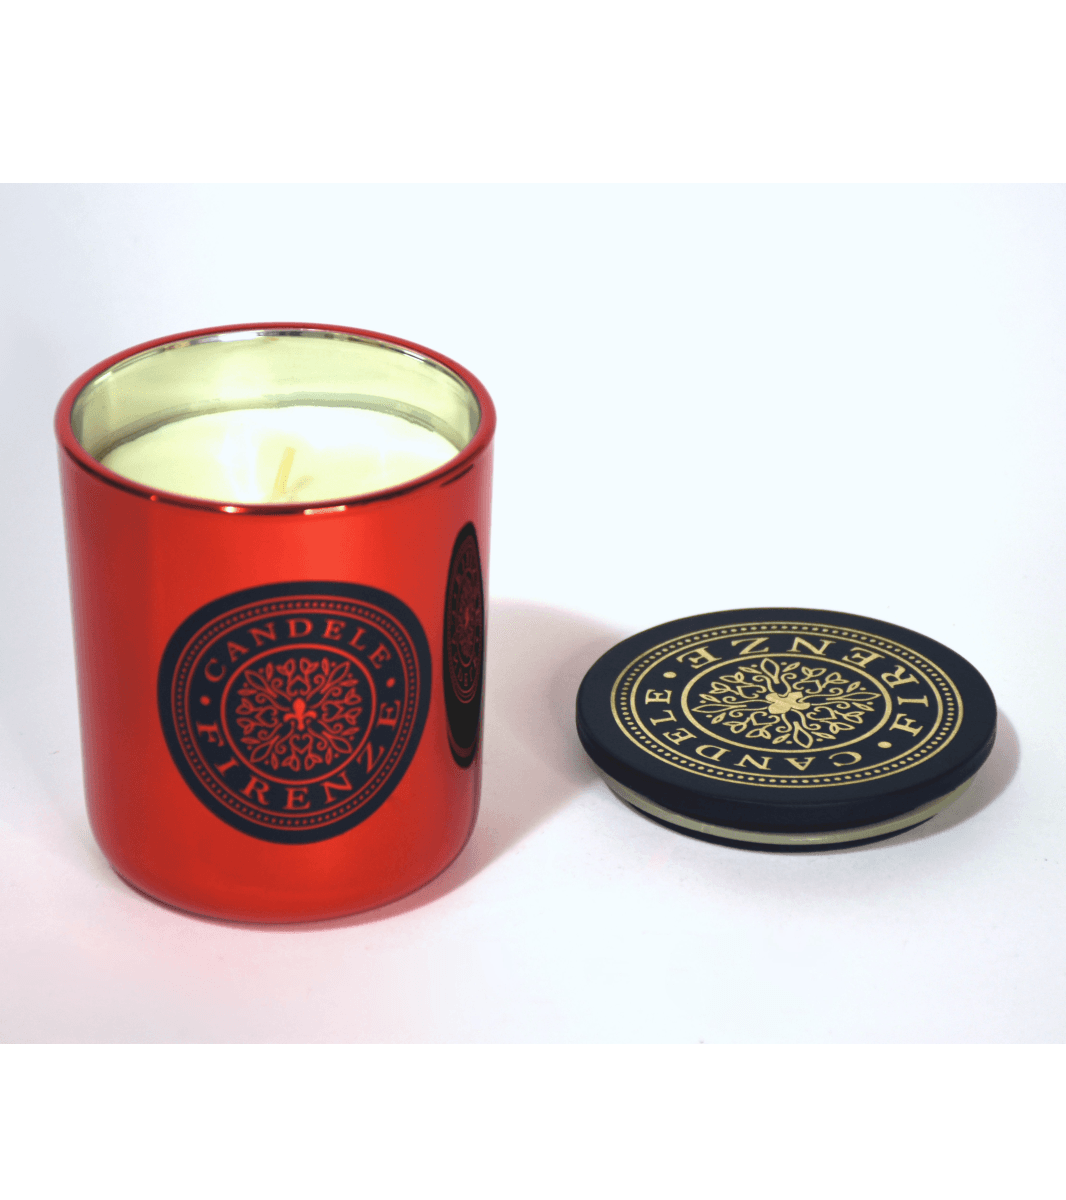 Selected image for CANDELE FIRENZE Свеќа Glass (металик црвена)